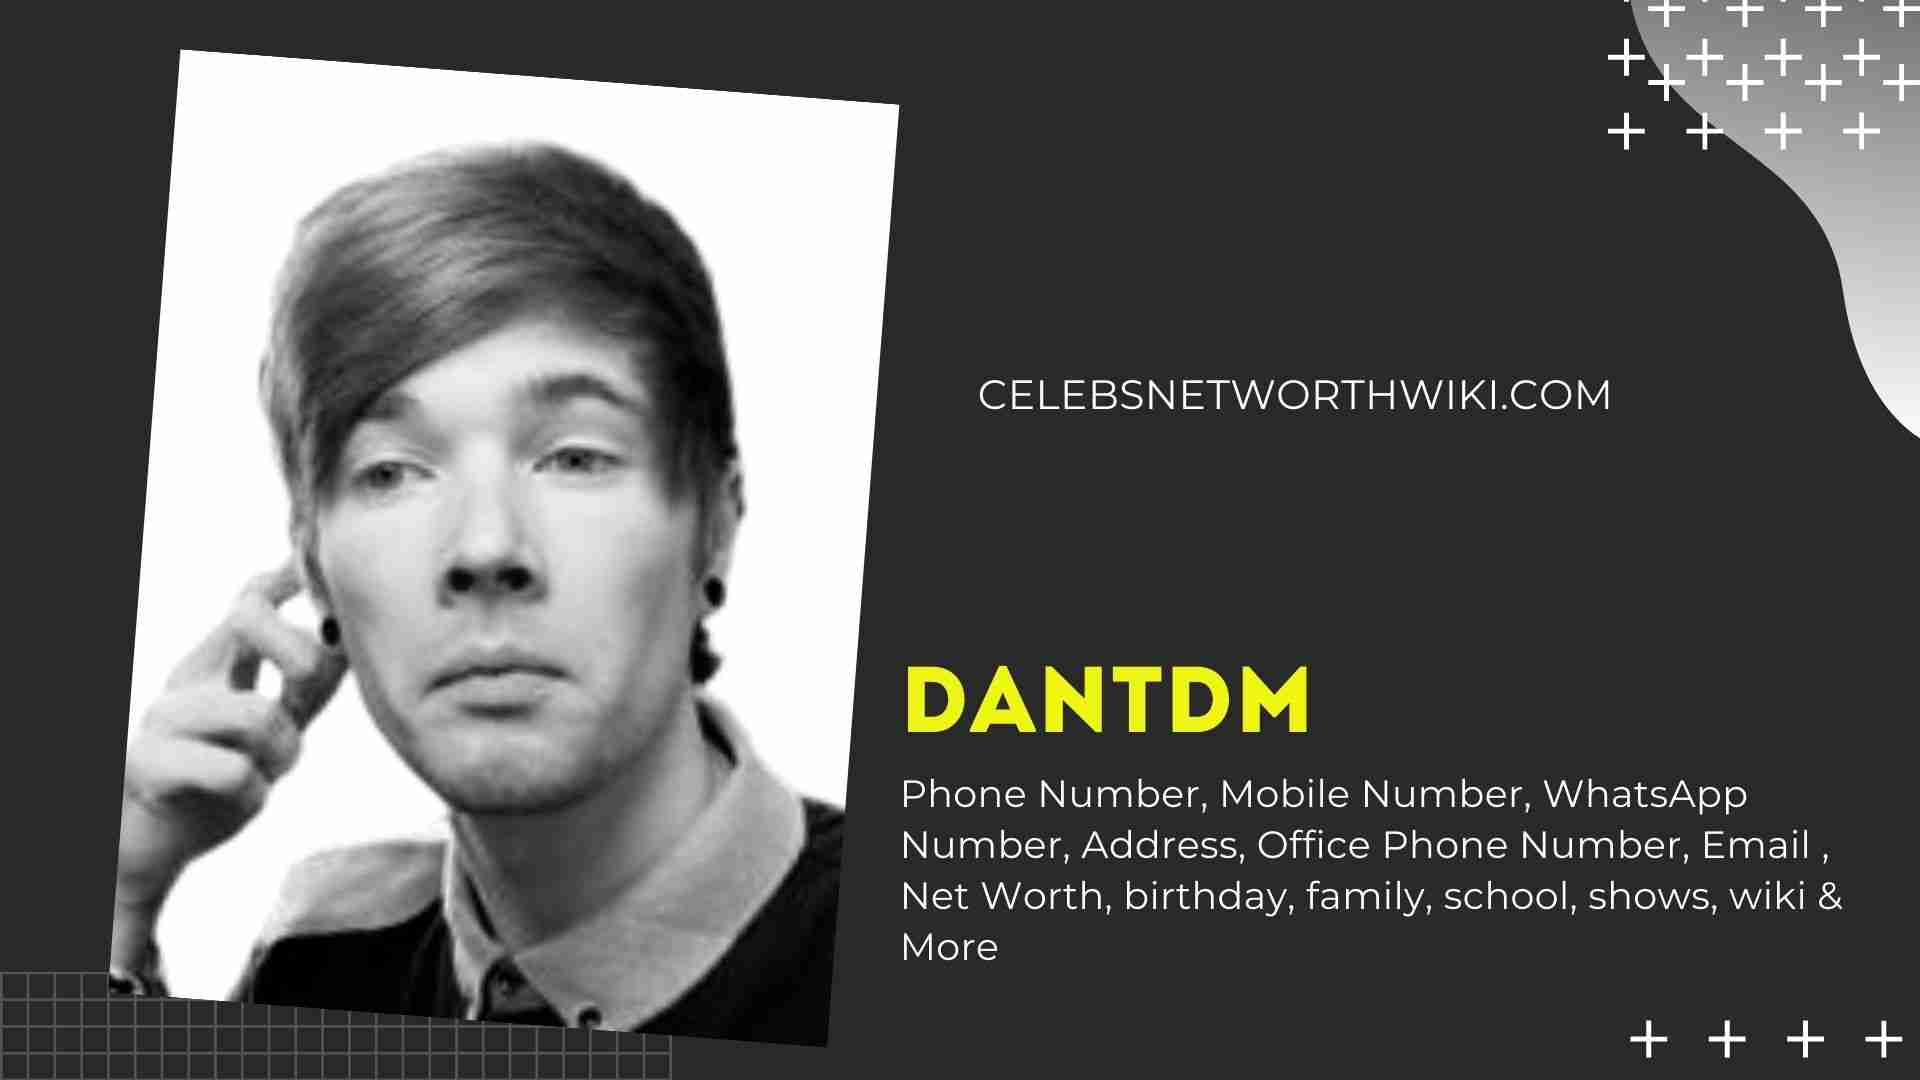 Dantdm Phone Number Texting Number Contact Number Mobile Number